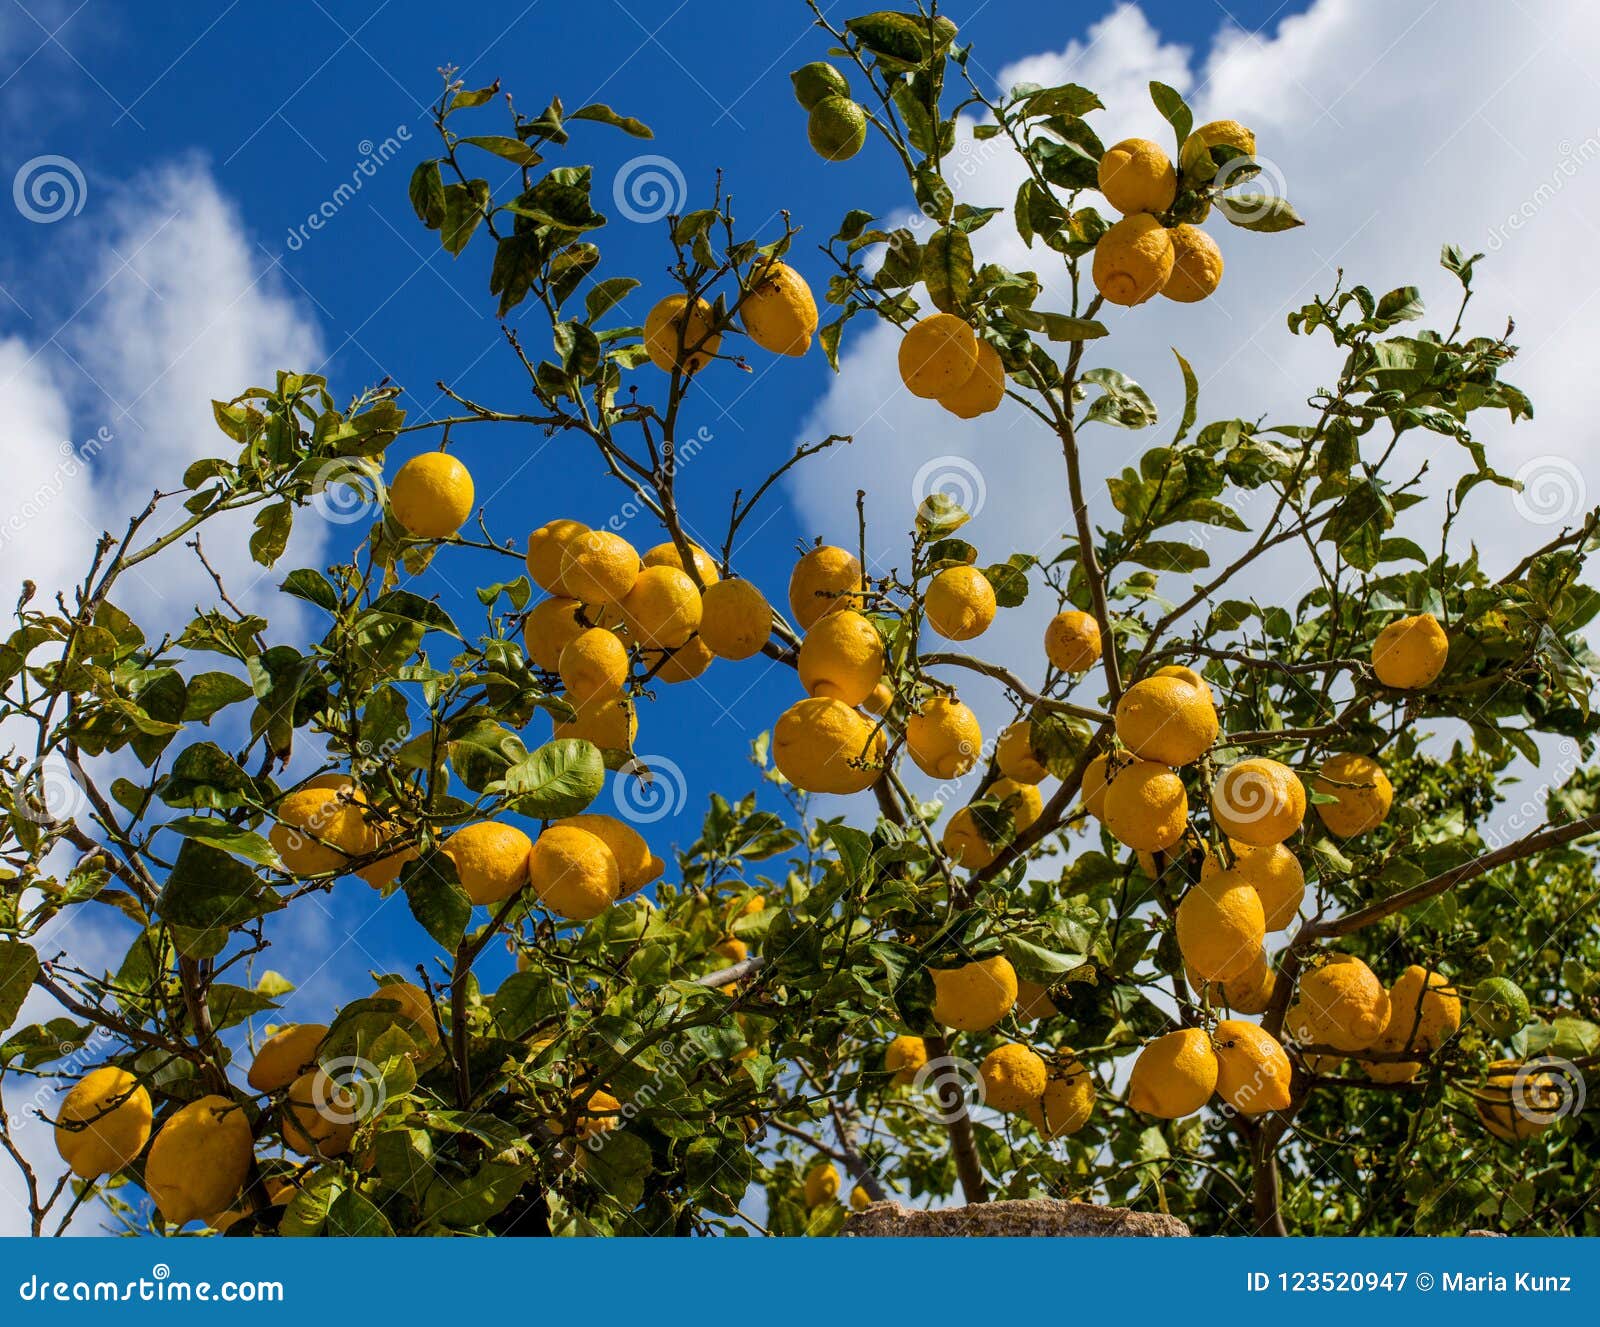 lemons hanging from a tree in a lemon grove